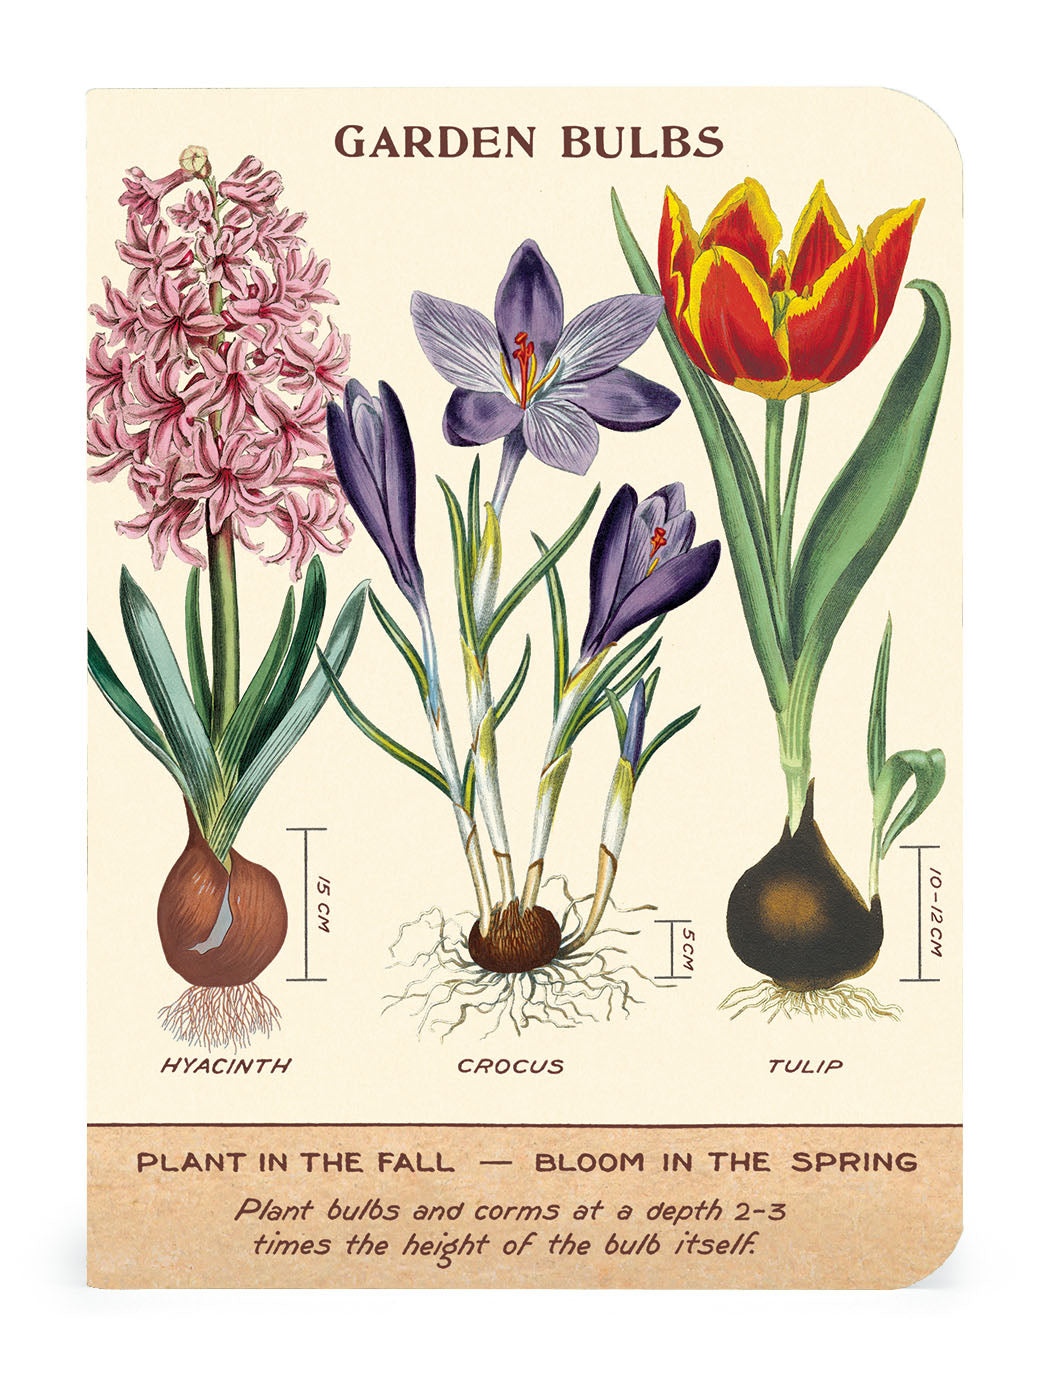 Cavallini Papers &amp; Co Vintage Artwork Gardening 3 Mini Notebooks set includes mini notebooks with garden bulbs plant the bloom in the spring design.